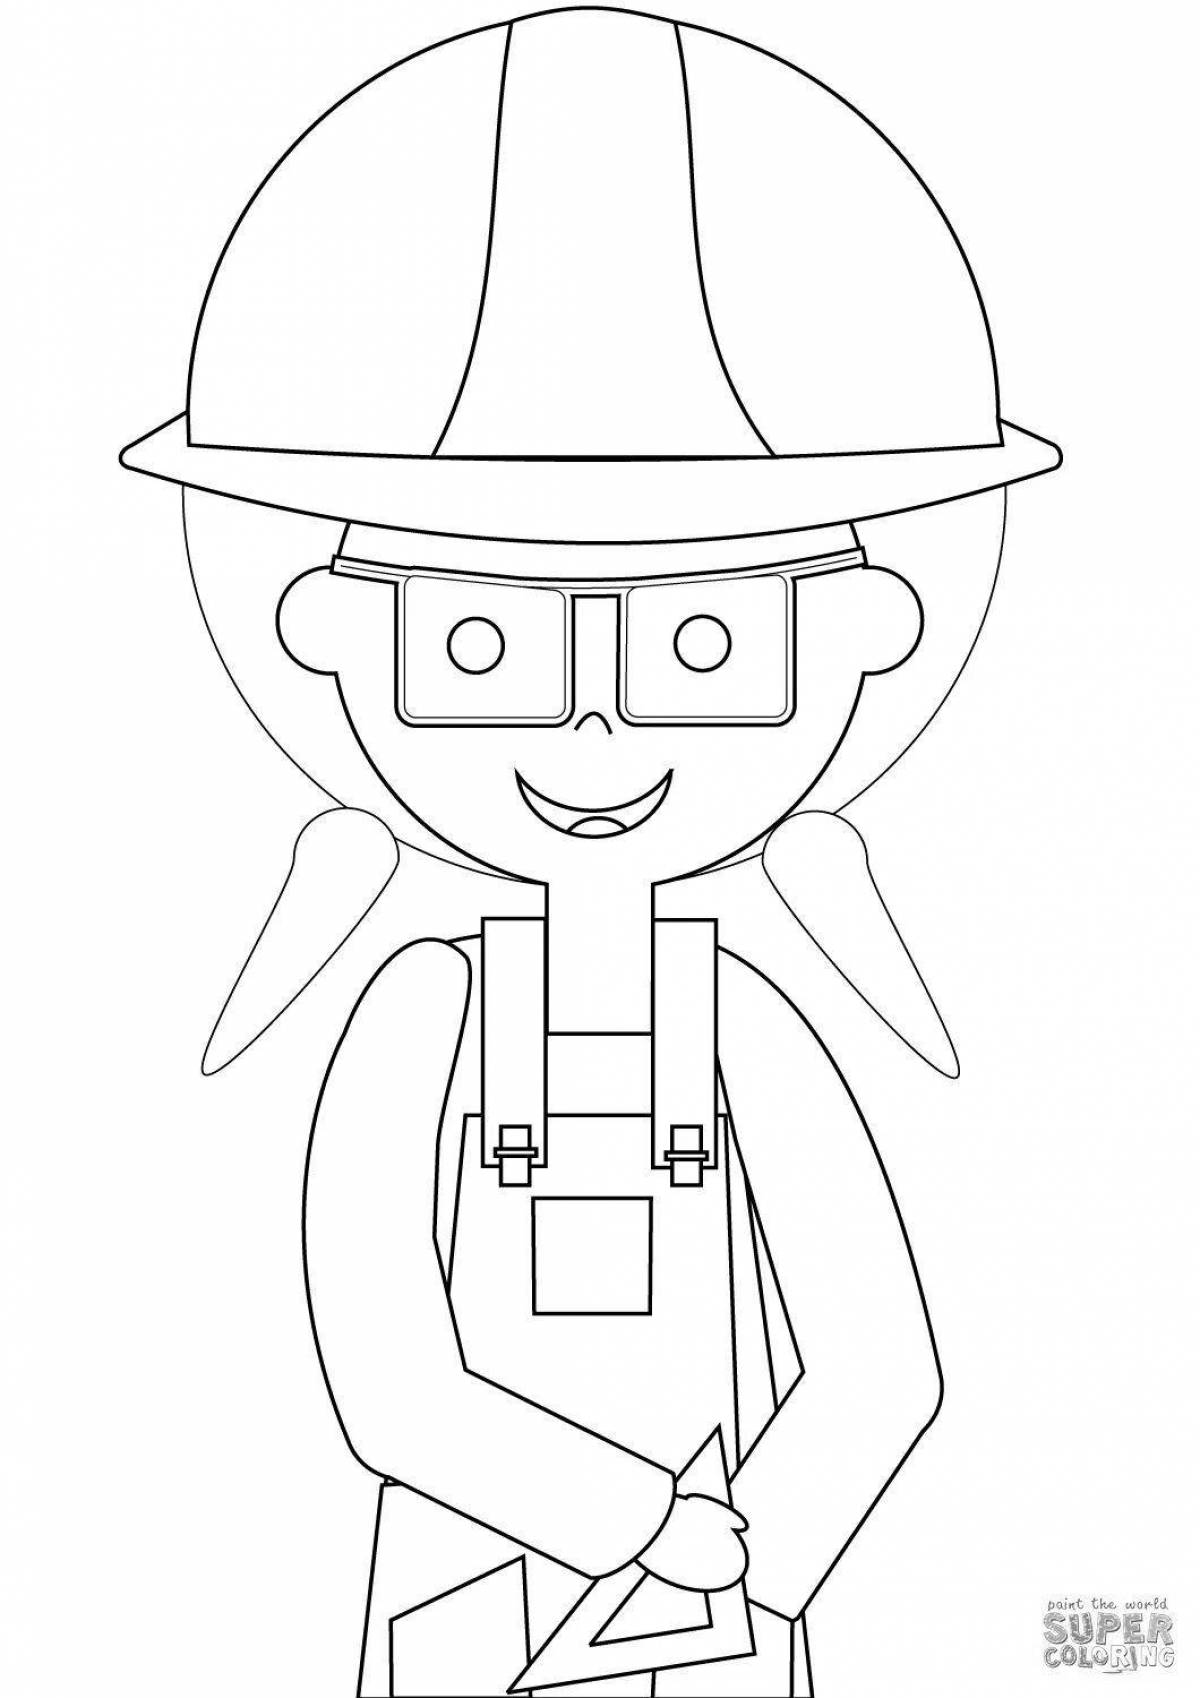 Playful miner coloring page for kids